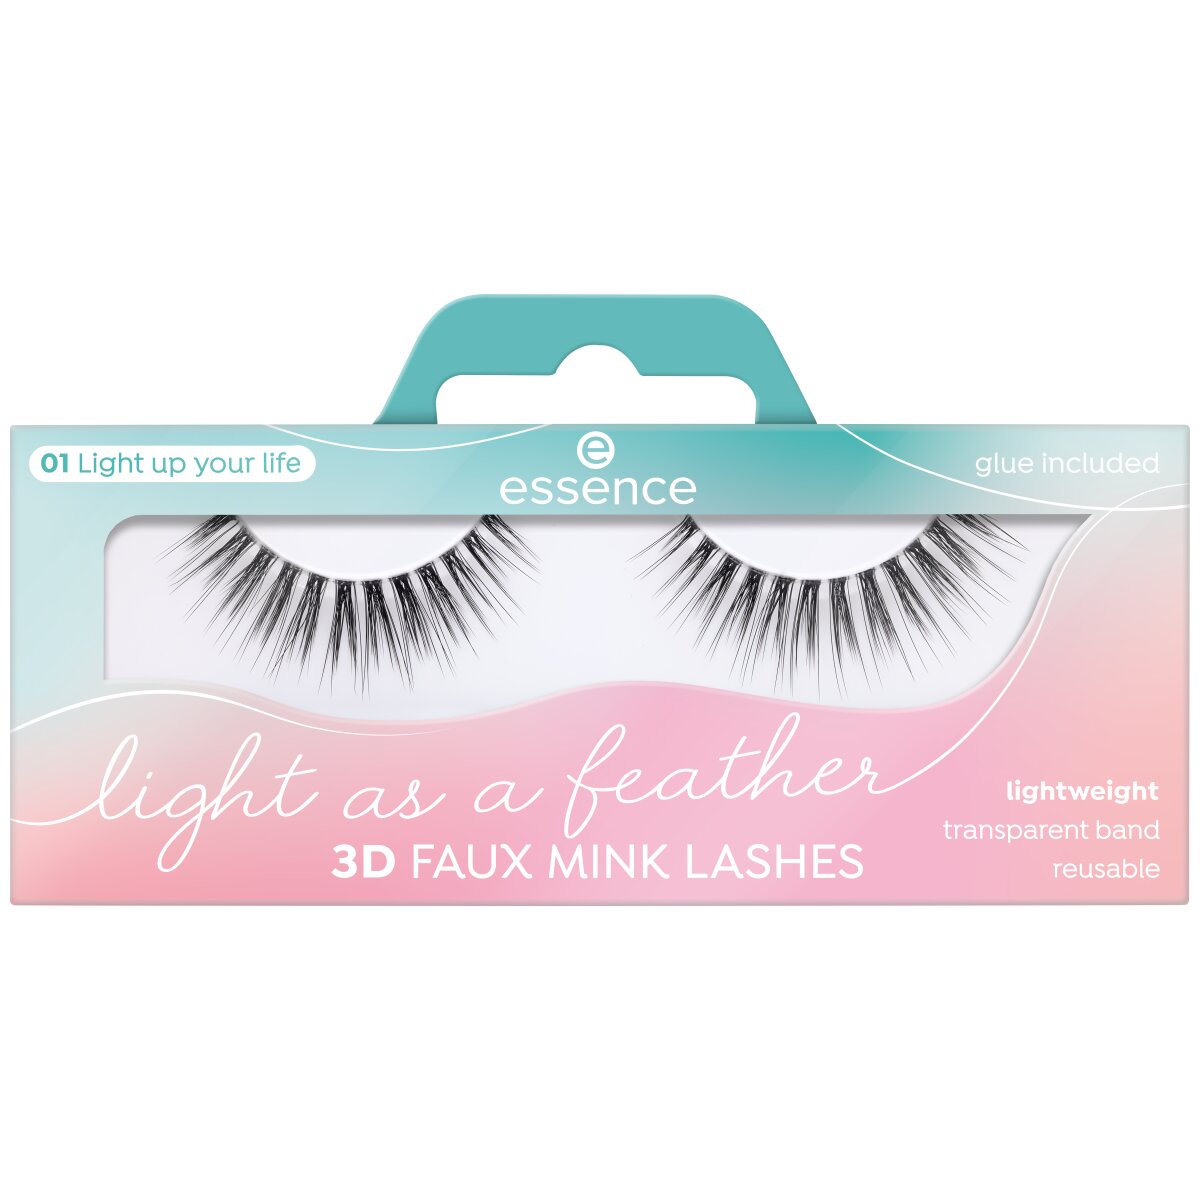 House Light Faux essence A – of Cosmetics 3D Mink Lashes Feather As